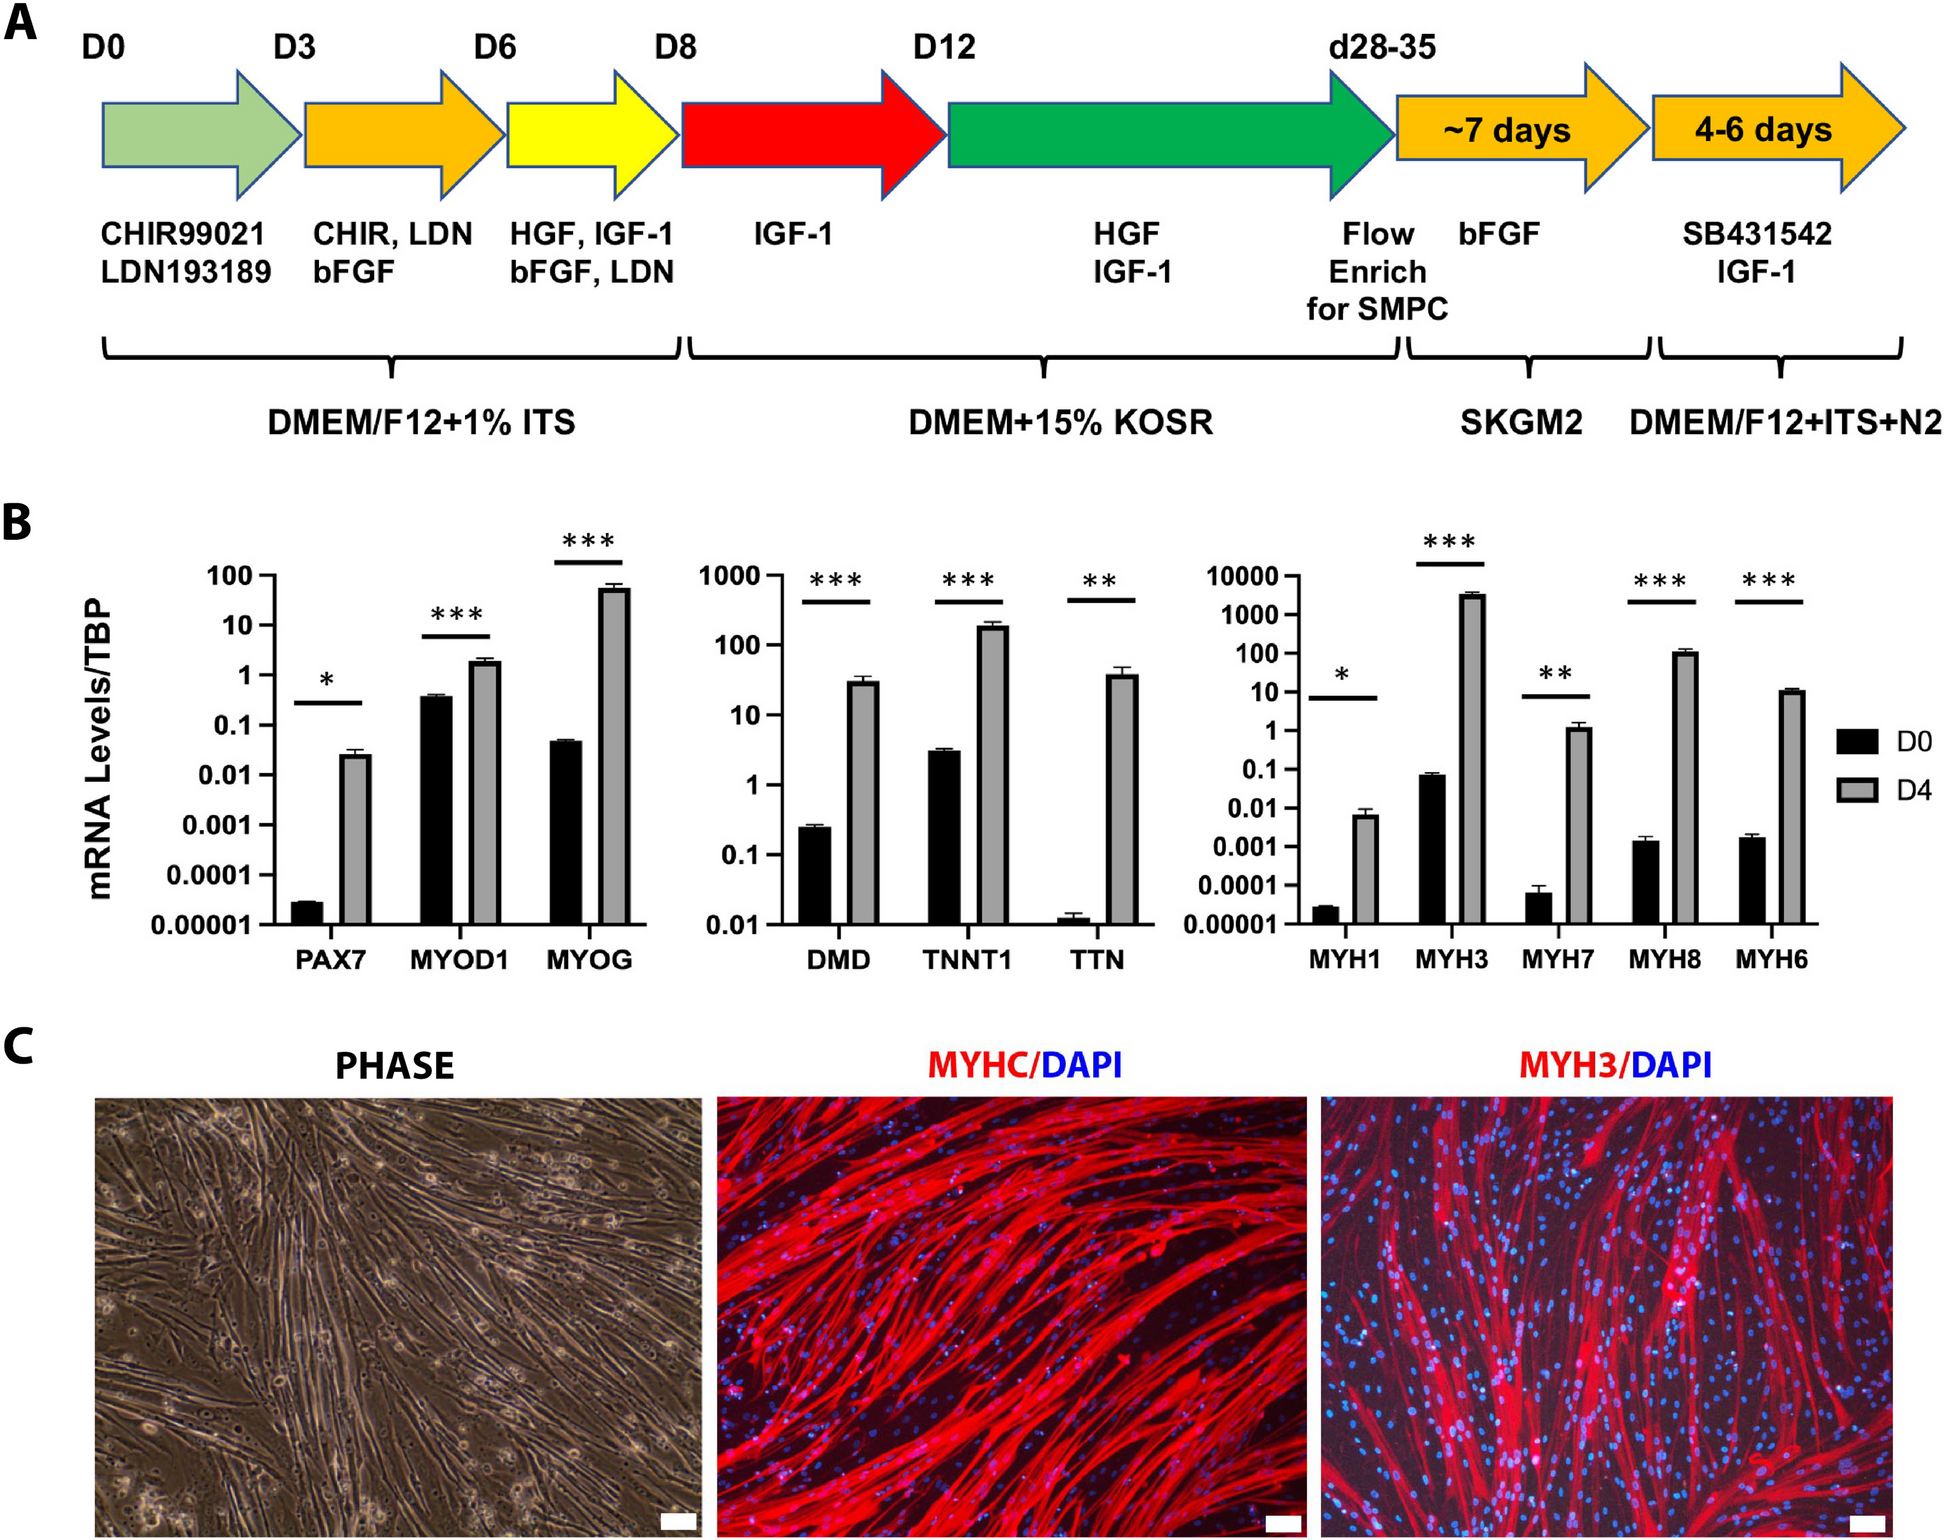 Motor neurons and endothelial cells additively promote development and fusion of human iPSC-derived skeletal myocytes